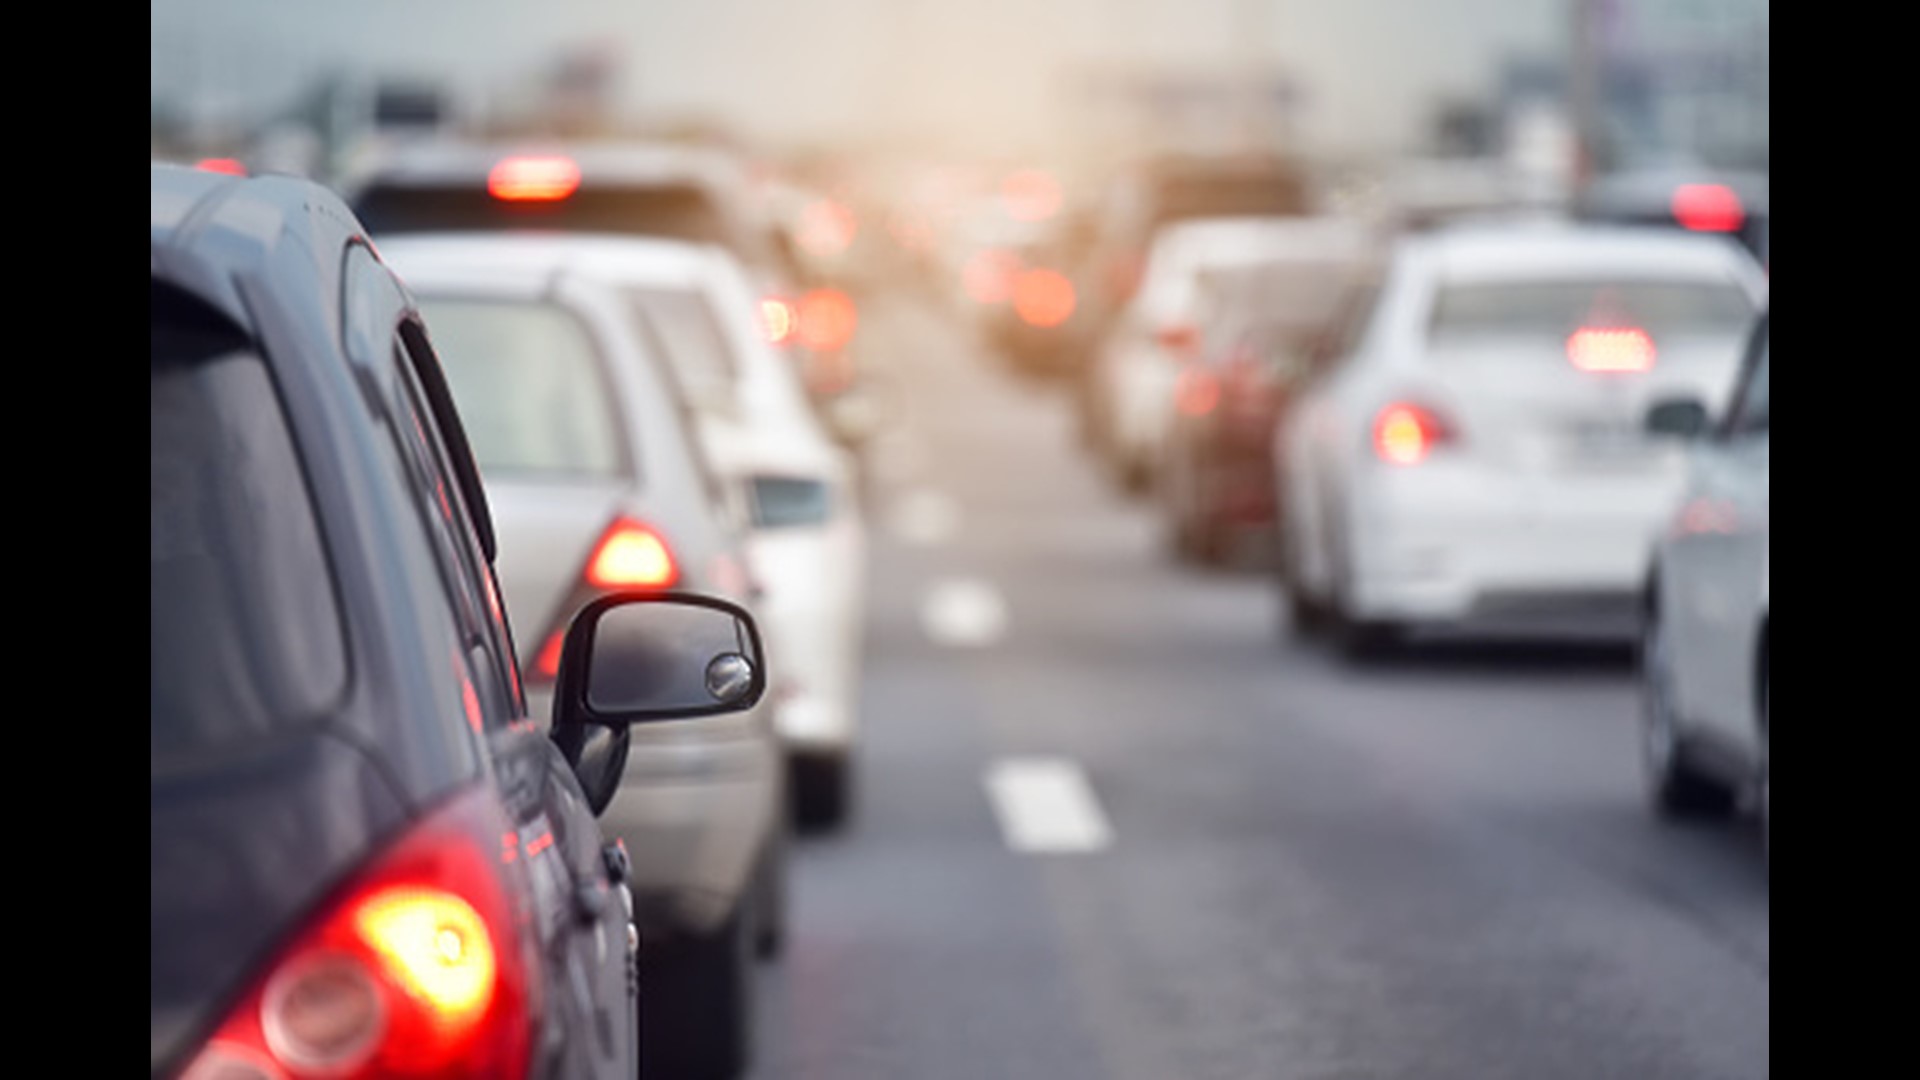 On June 11, 2019, Governor Gretchen Whitmer signed legislation ushering in a new era of No-Fault Insurance law in Michigan. The changes are substantial and will affect every driver in Michigan.  We asked Michigan Auto Law Attorney Brandon Hewitt to explain how.